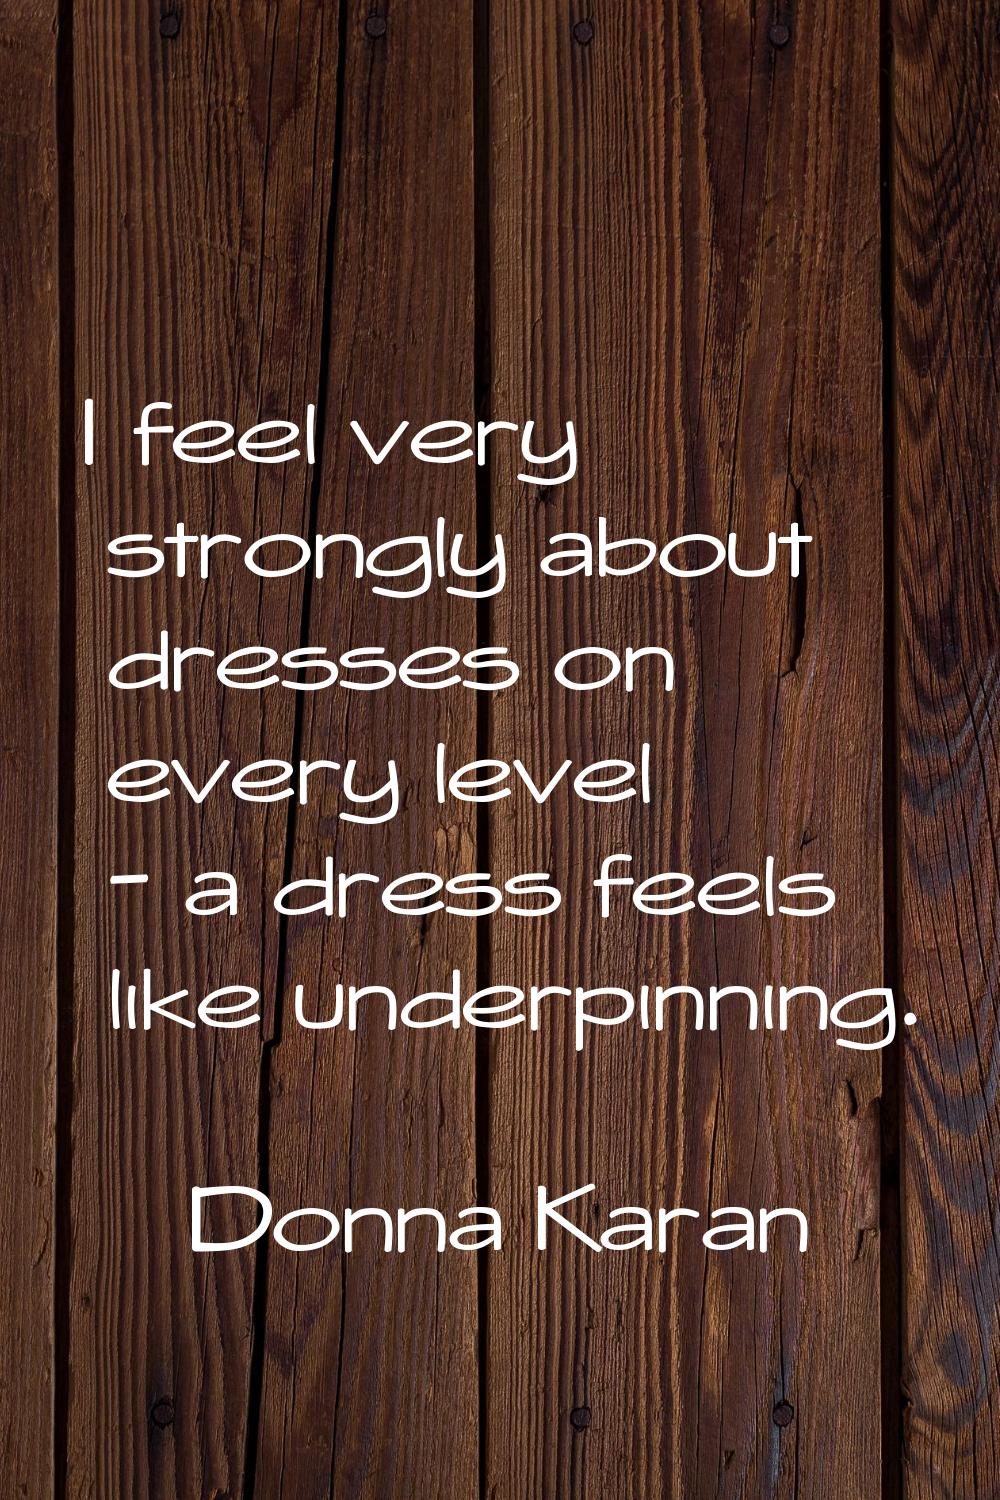 I feel very strongly about dresses on every level - a dress feels like underpinning.